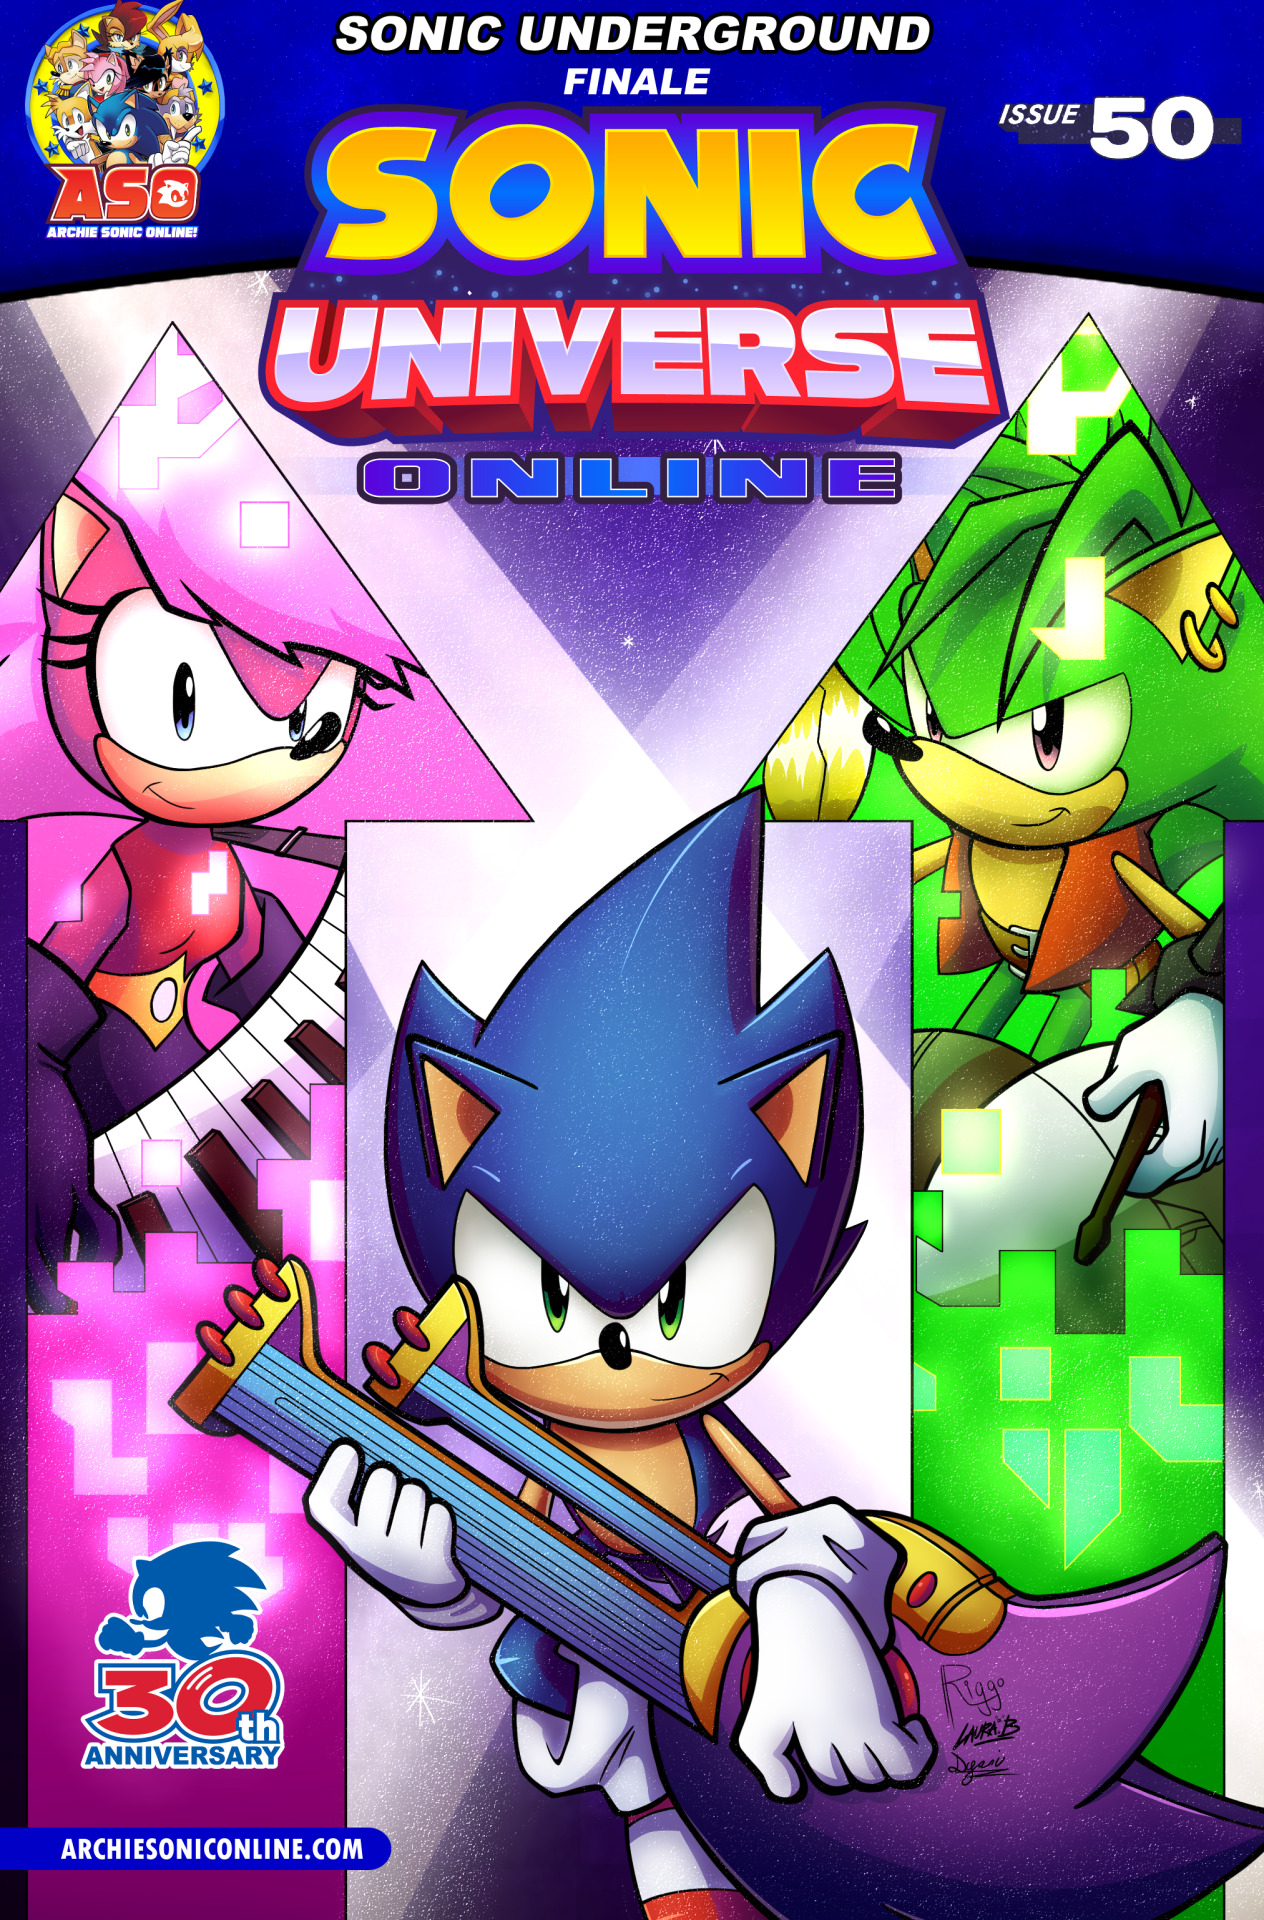 Archie Sonic Online — Sonic Universe Online #50 is now online!